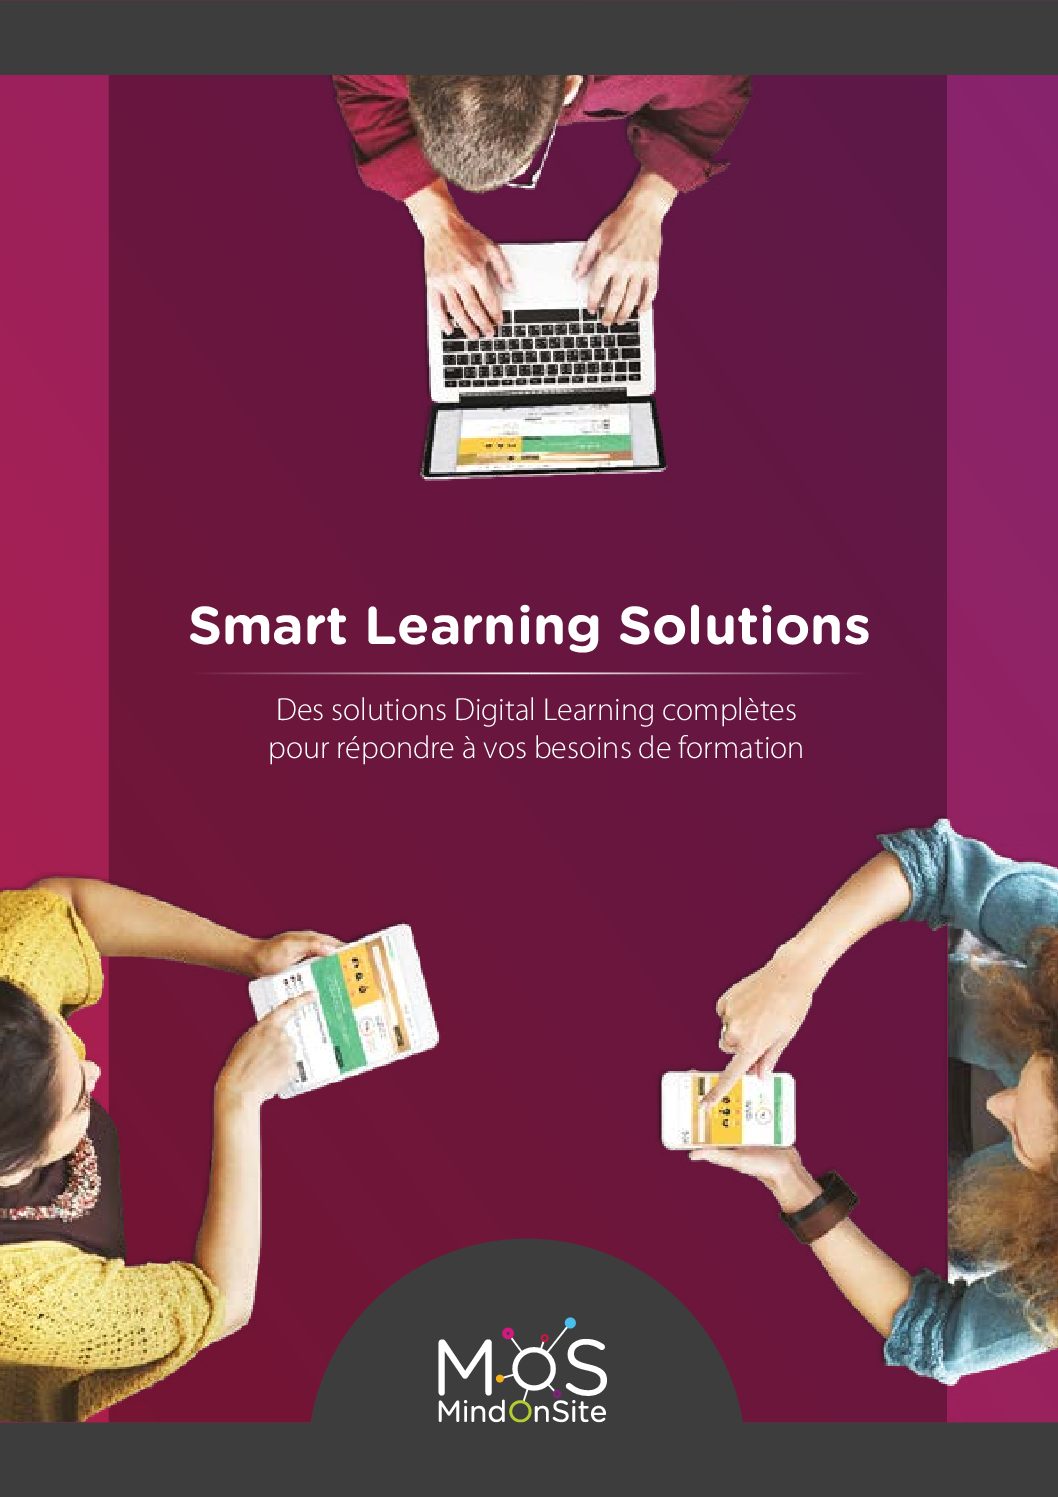 Smart Learning Solutions MindOnSite